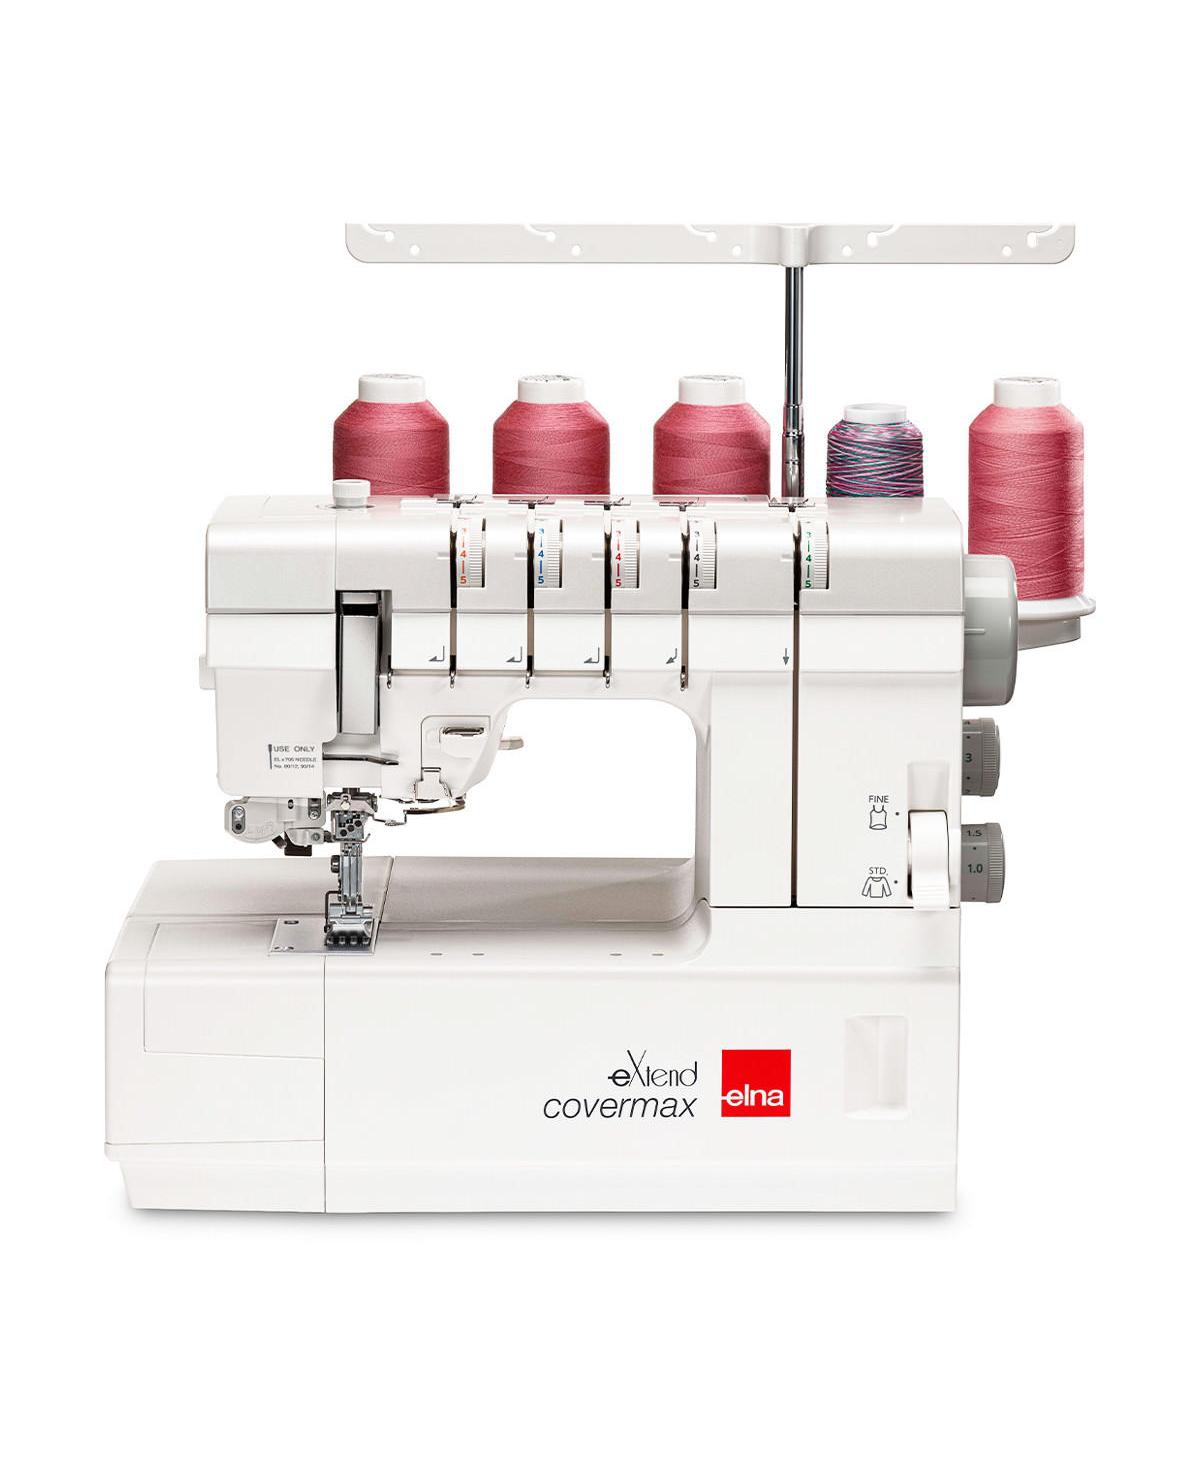 eXtend Easy Cover Max CoverStitch Serger Machine - White